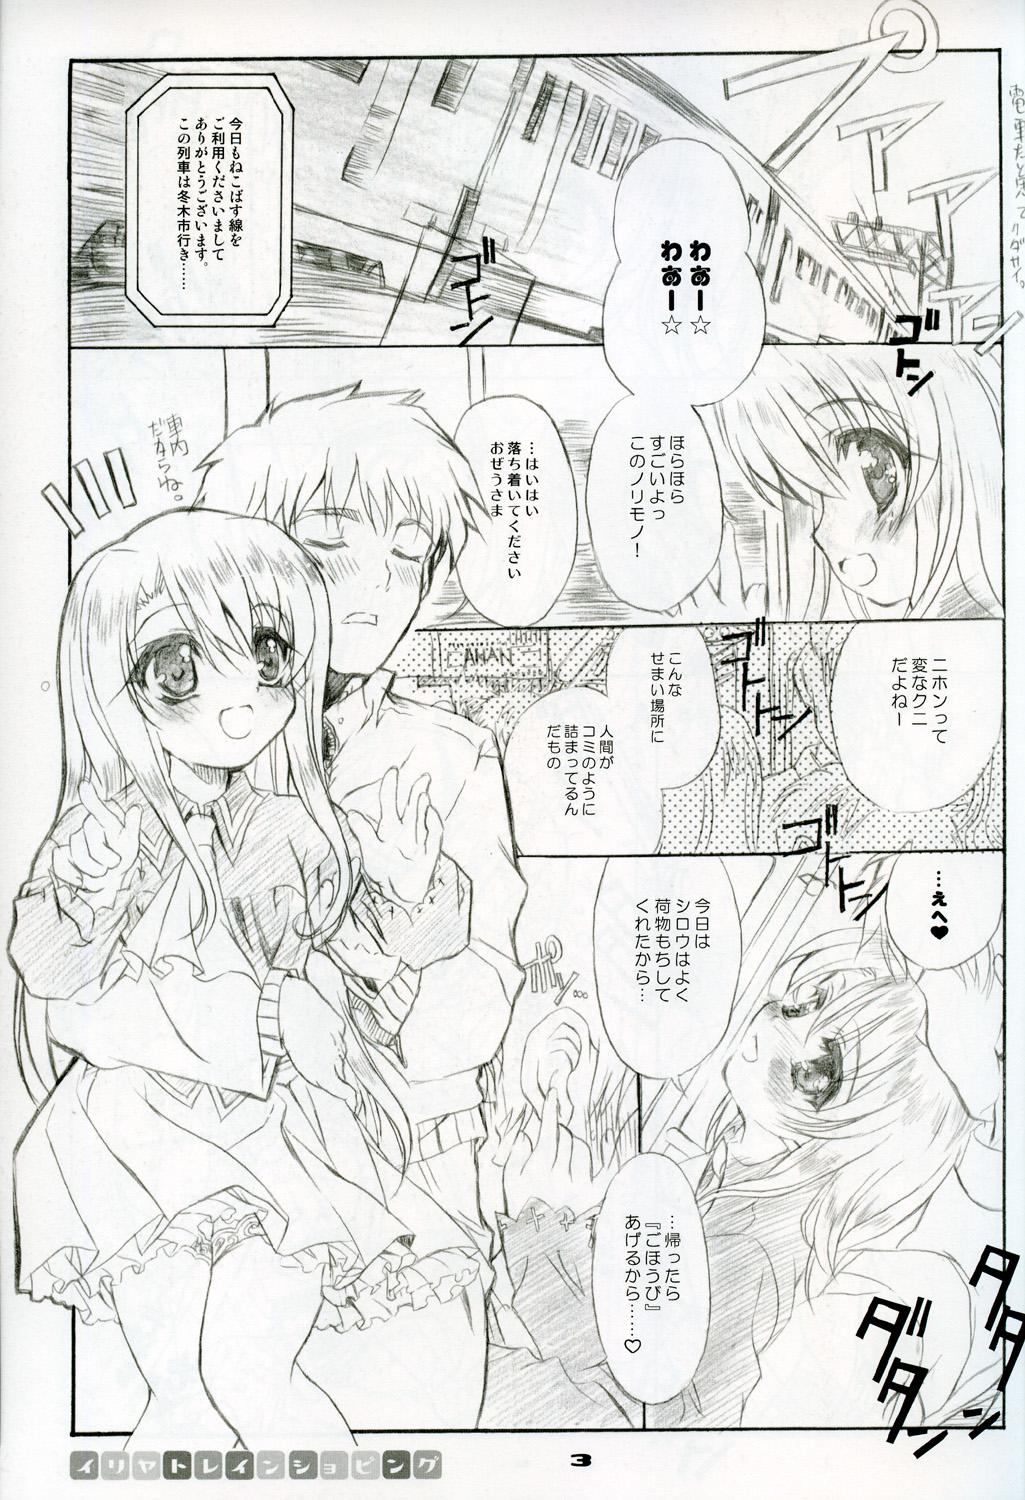 First Time Illya Train Shopping - Fate stay night Gilf - Page 3